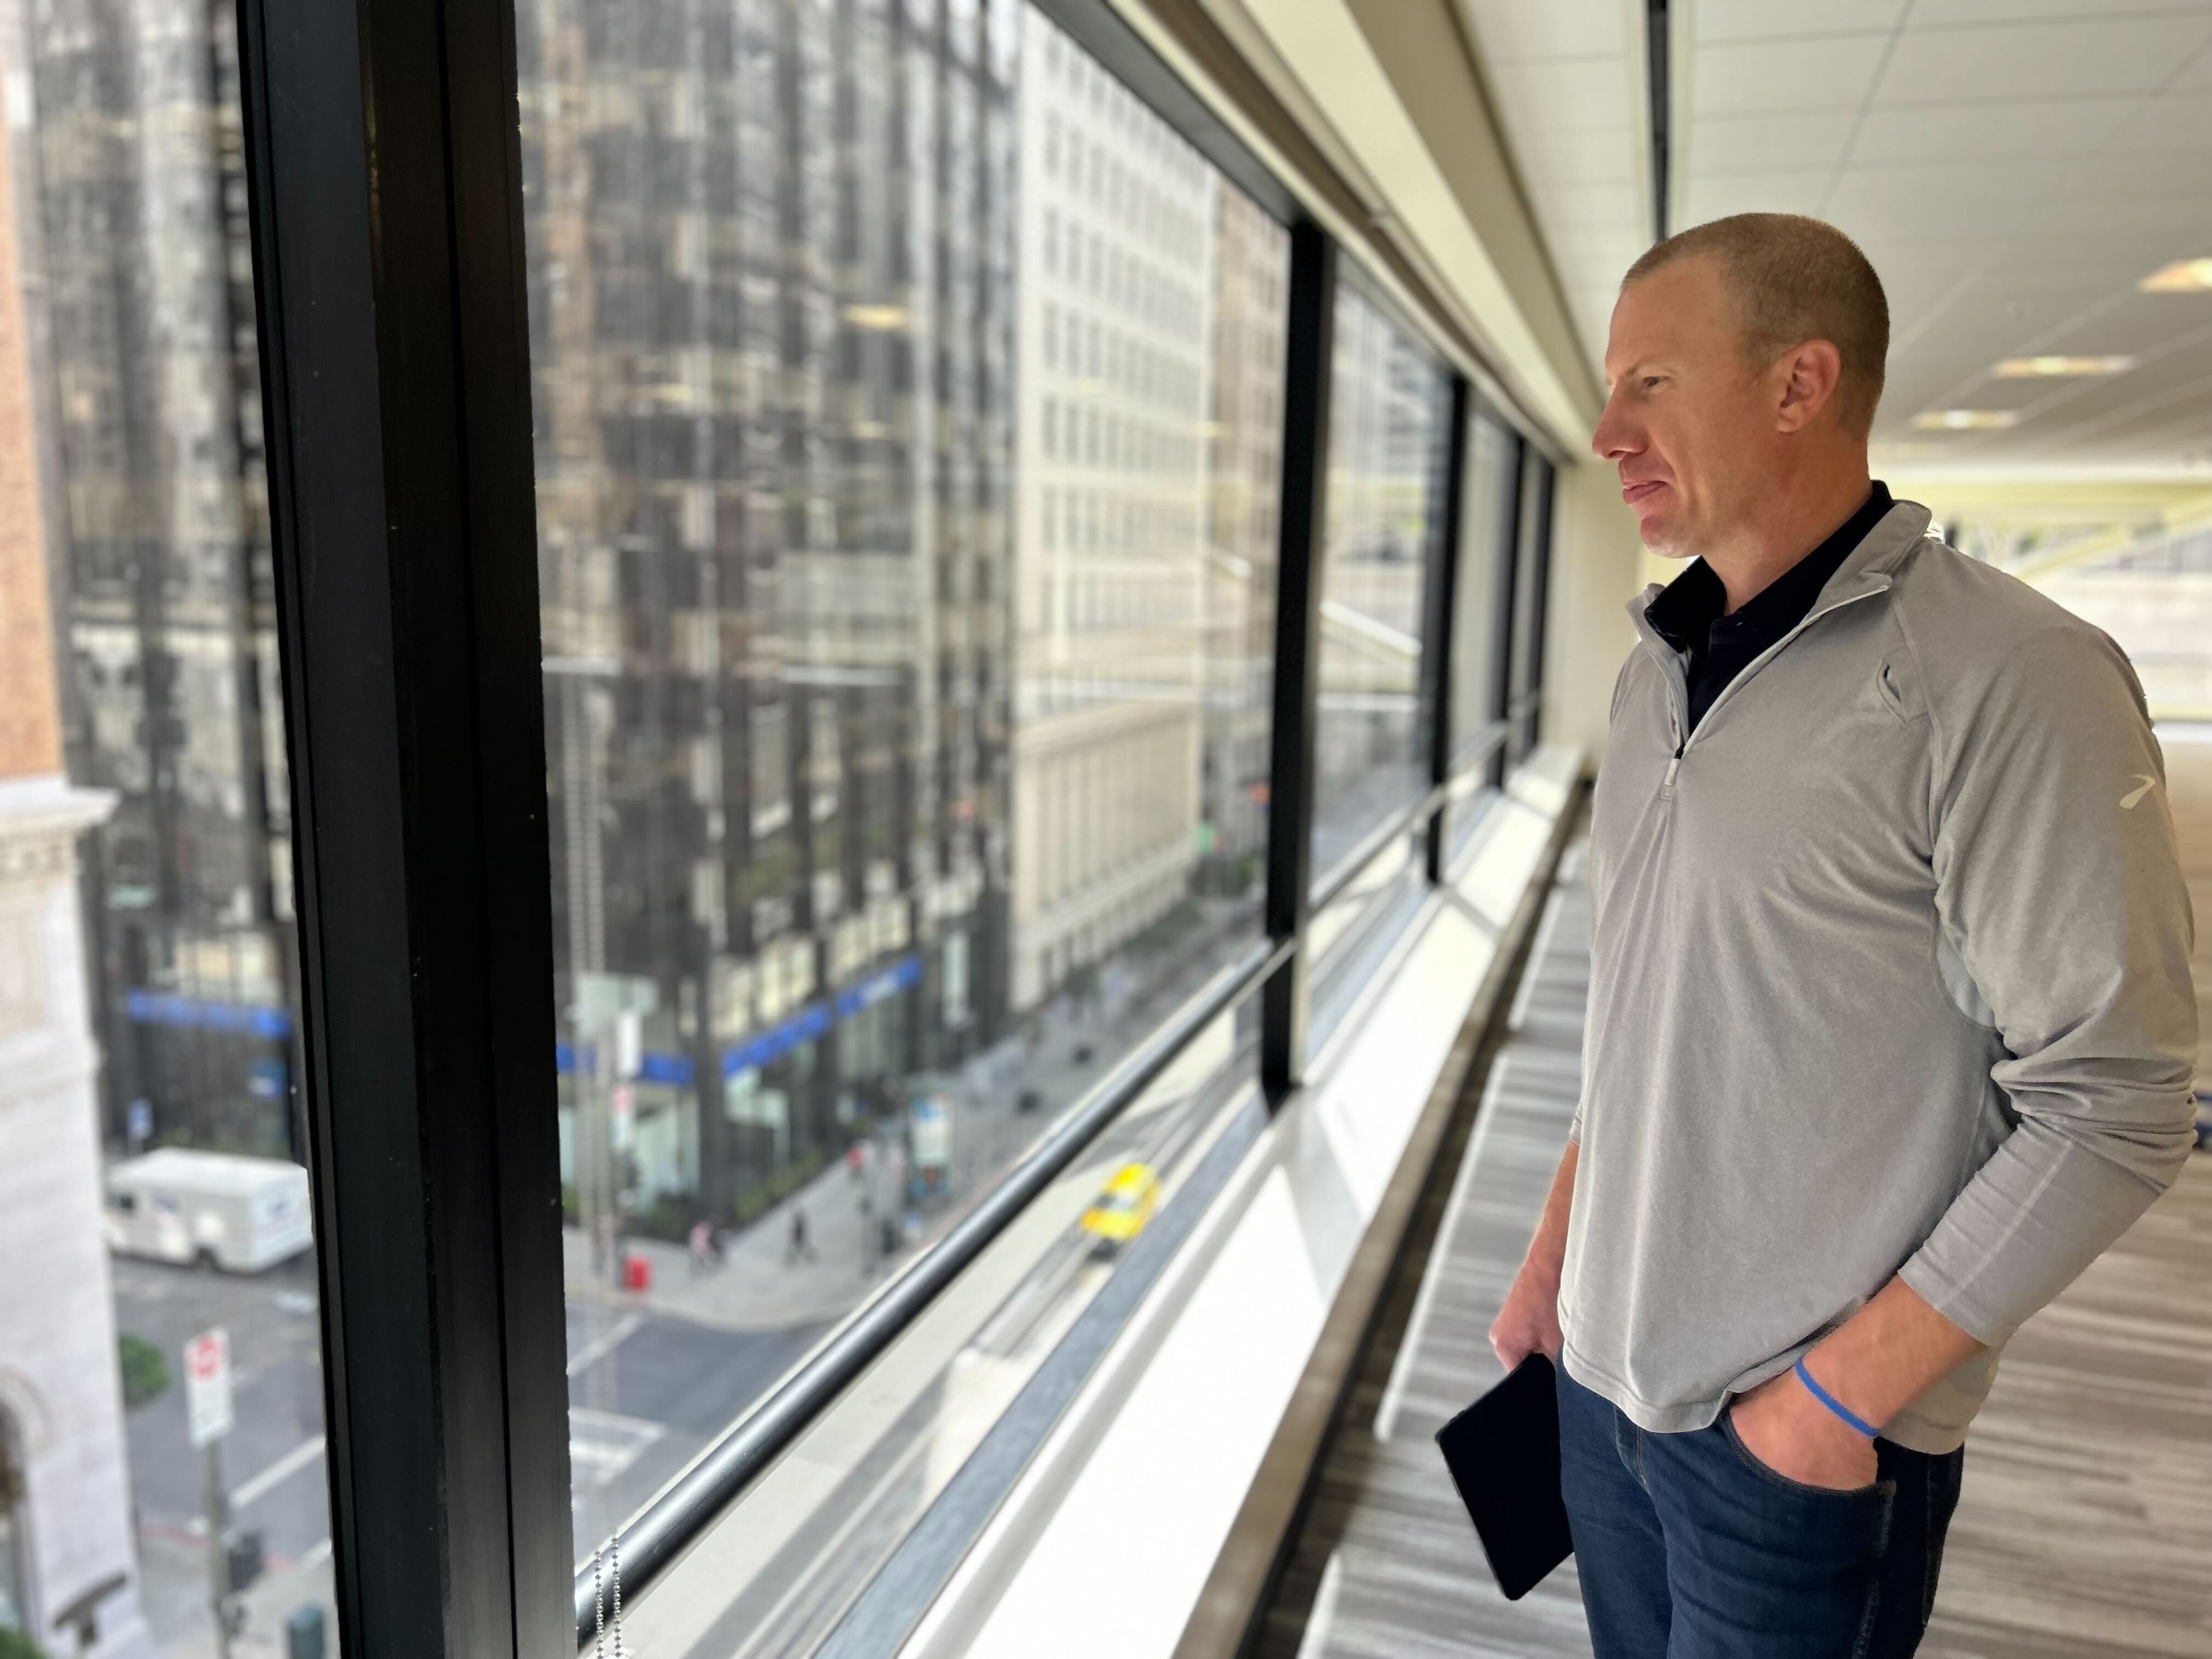 A man in a gray shirt stands by large windows overlooking a busy city street, holding a tablet and gazing outward thoughtfully.